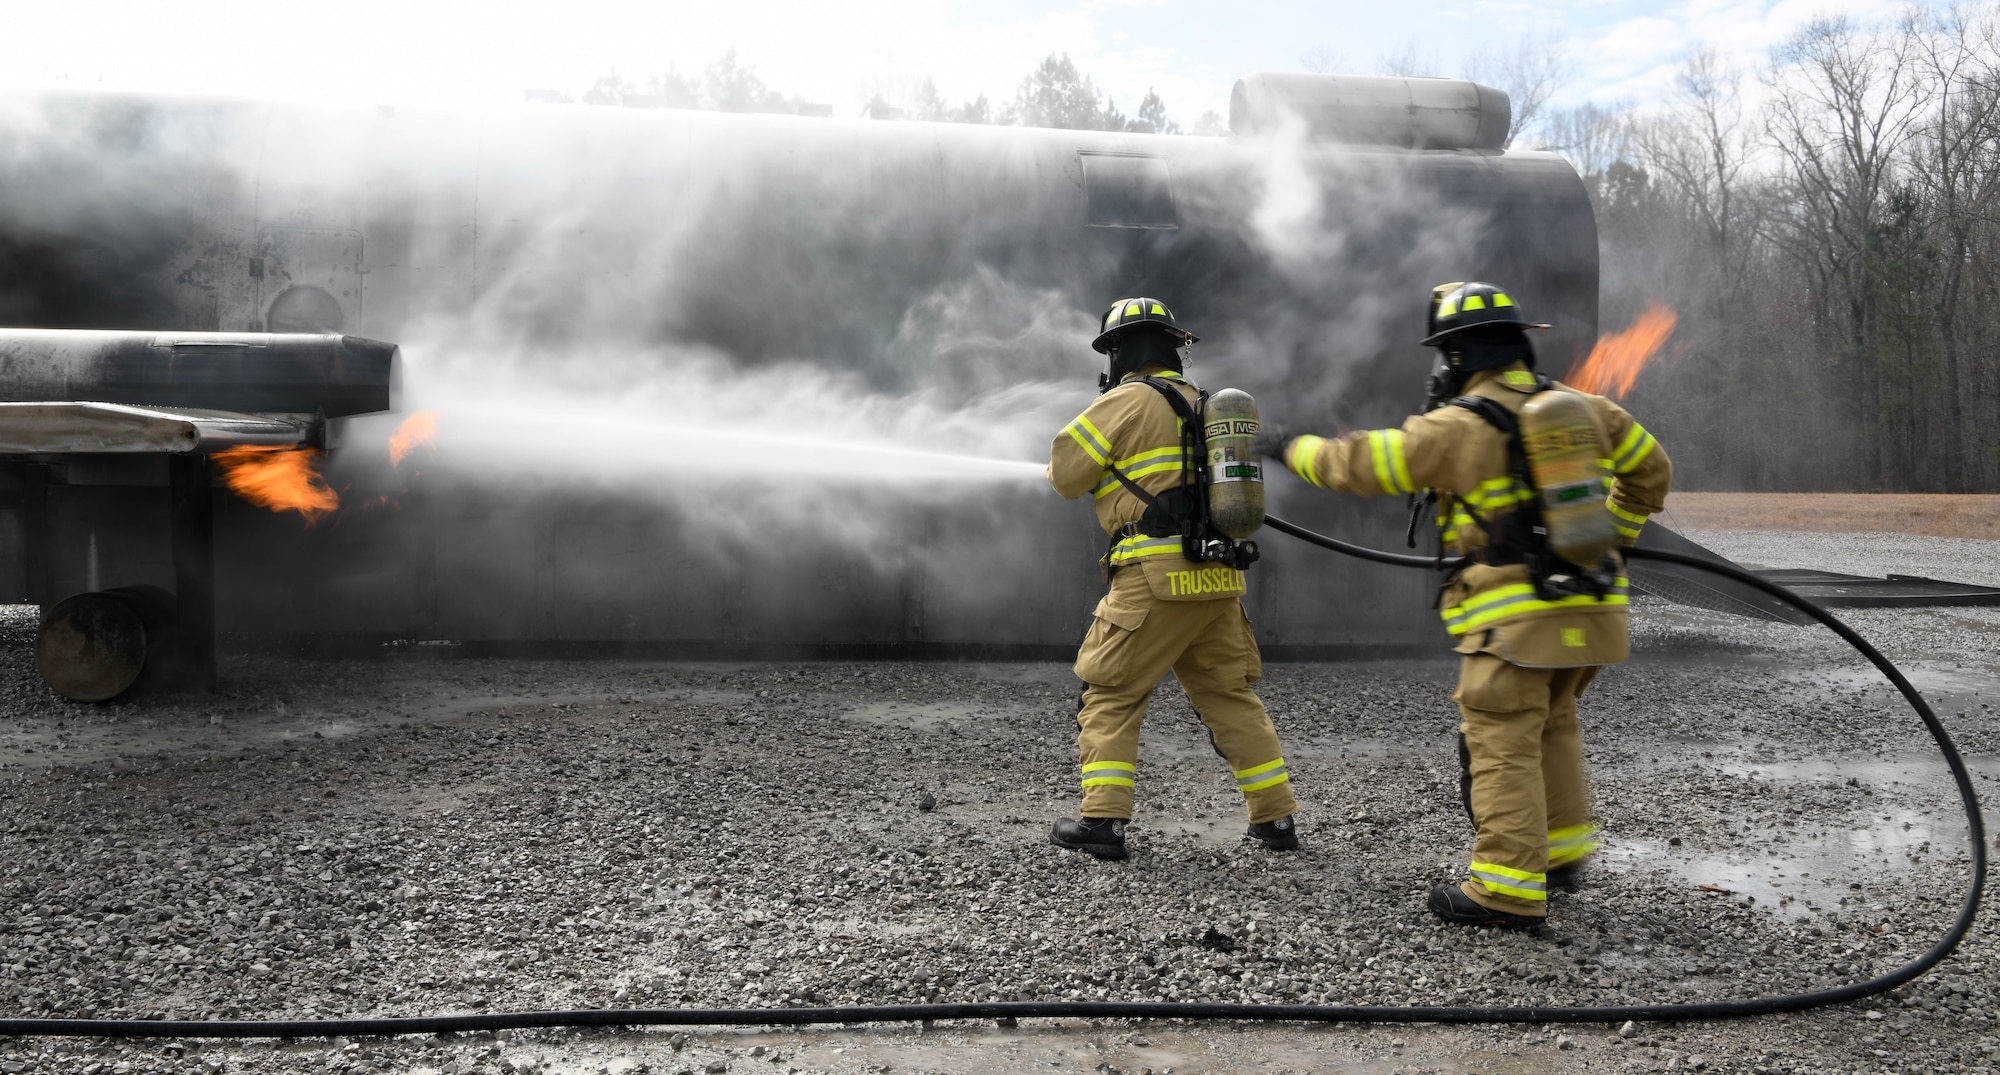 Arnold Air Force Base Fire and Emergency Services battle an engine fire as they train Feb. 10, 2021, on aircraft rescue and firefighting techniques using a propane-fueled trainer brought to the base. (U.S. Air Force photo by Jill Pickett)